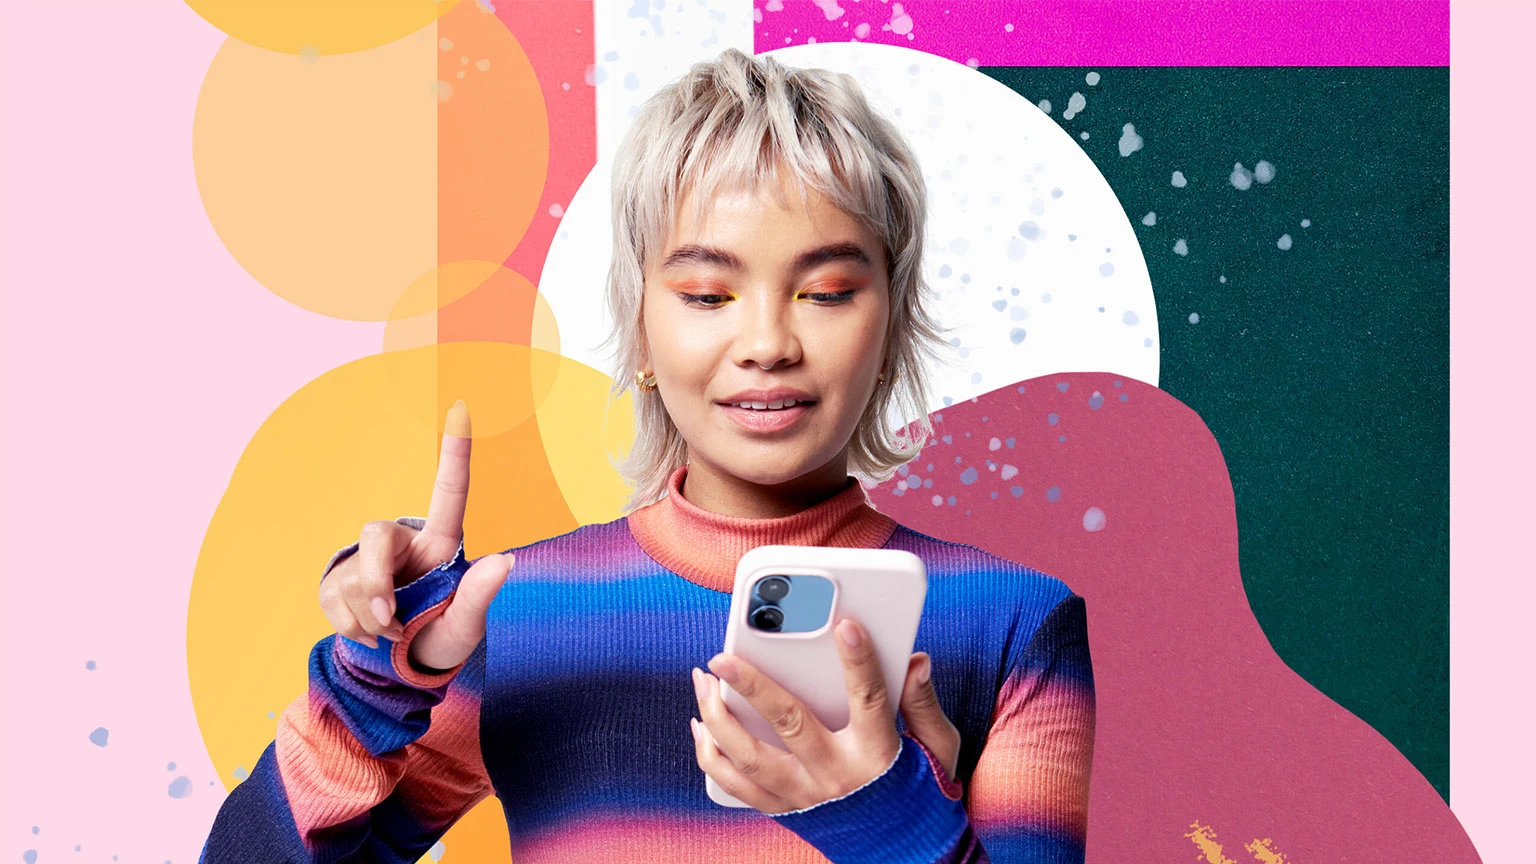 A woman with short blond hair in a bright striped top, is holding and looking at her phone in one hand and pointing upwards with her other hand on a very colourful and abstract background.